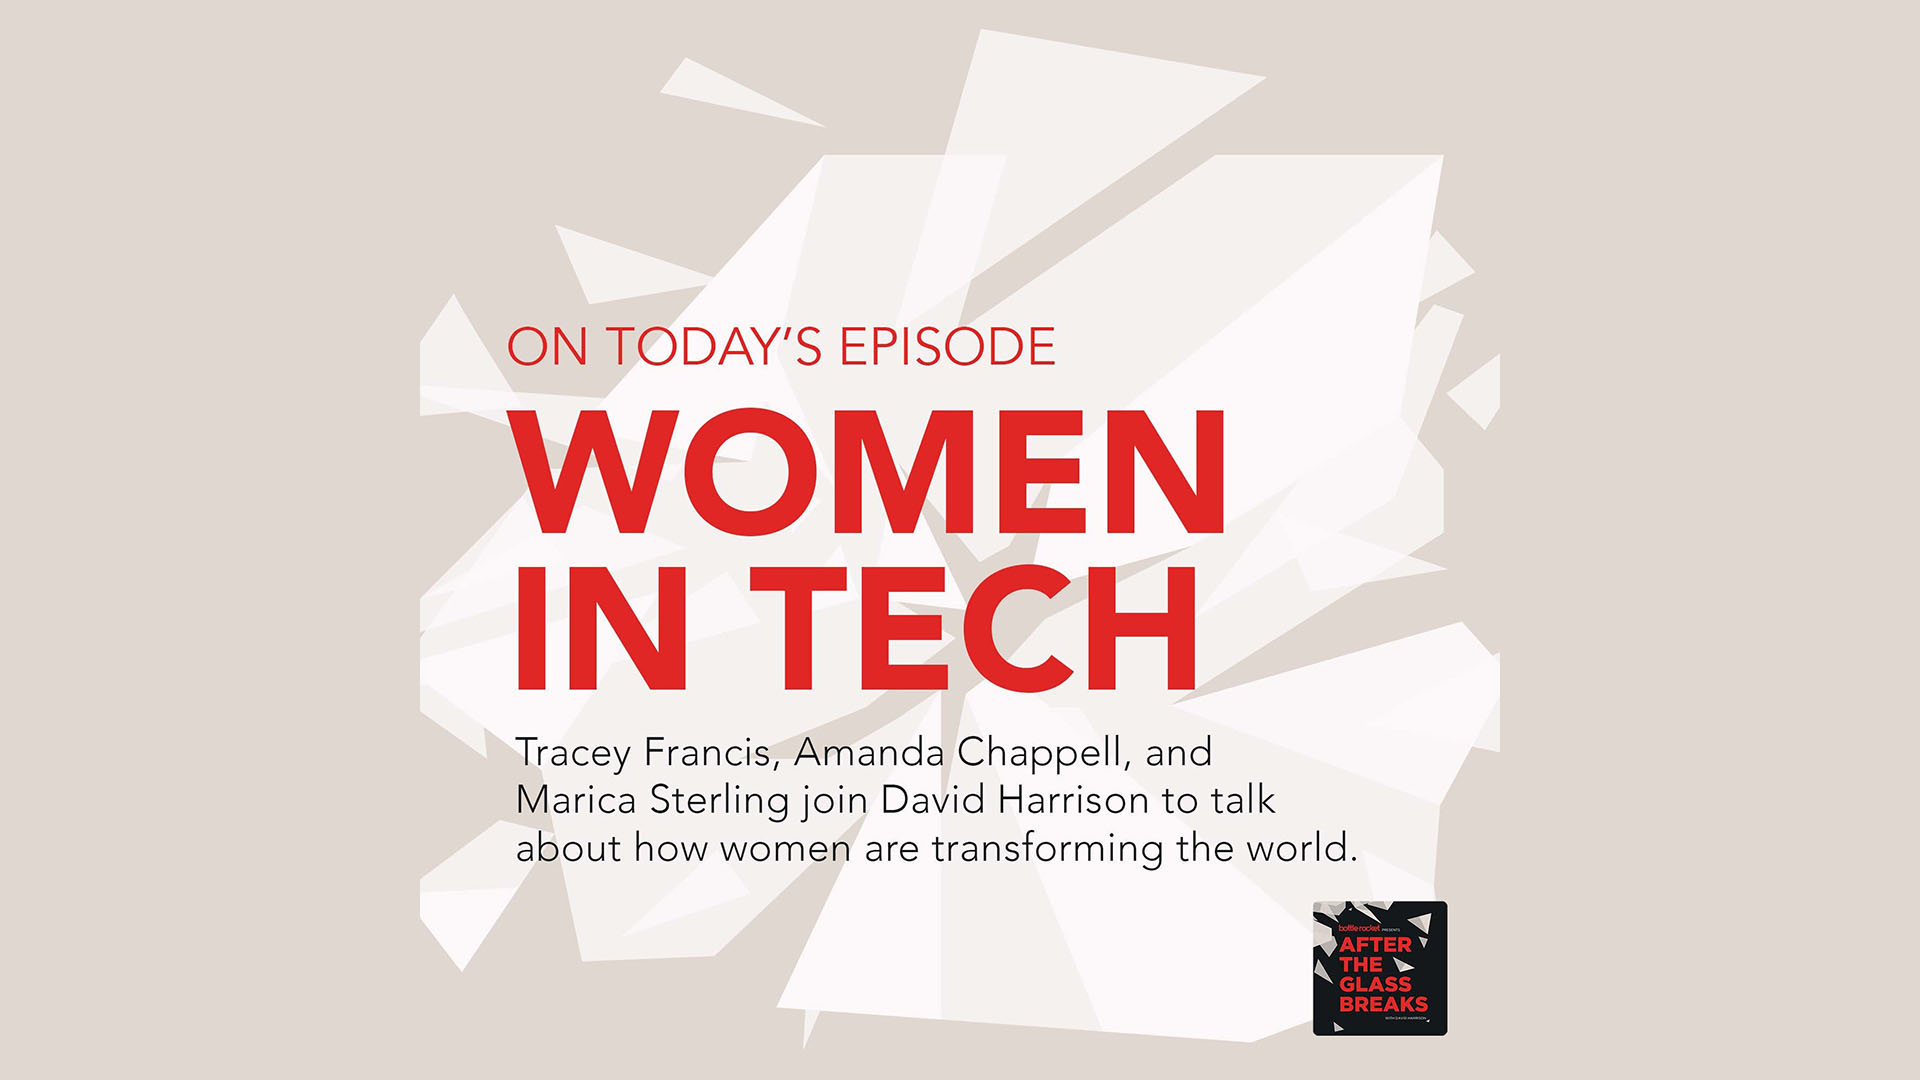 Podcast: After the Glass Breaks Special – Women in Tech